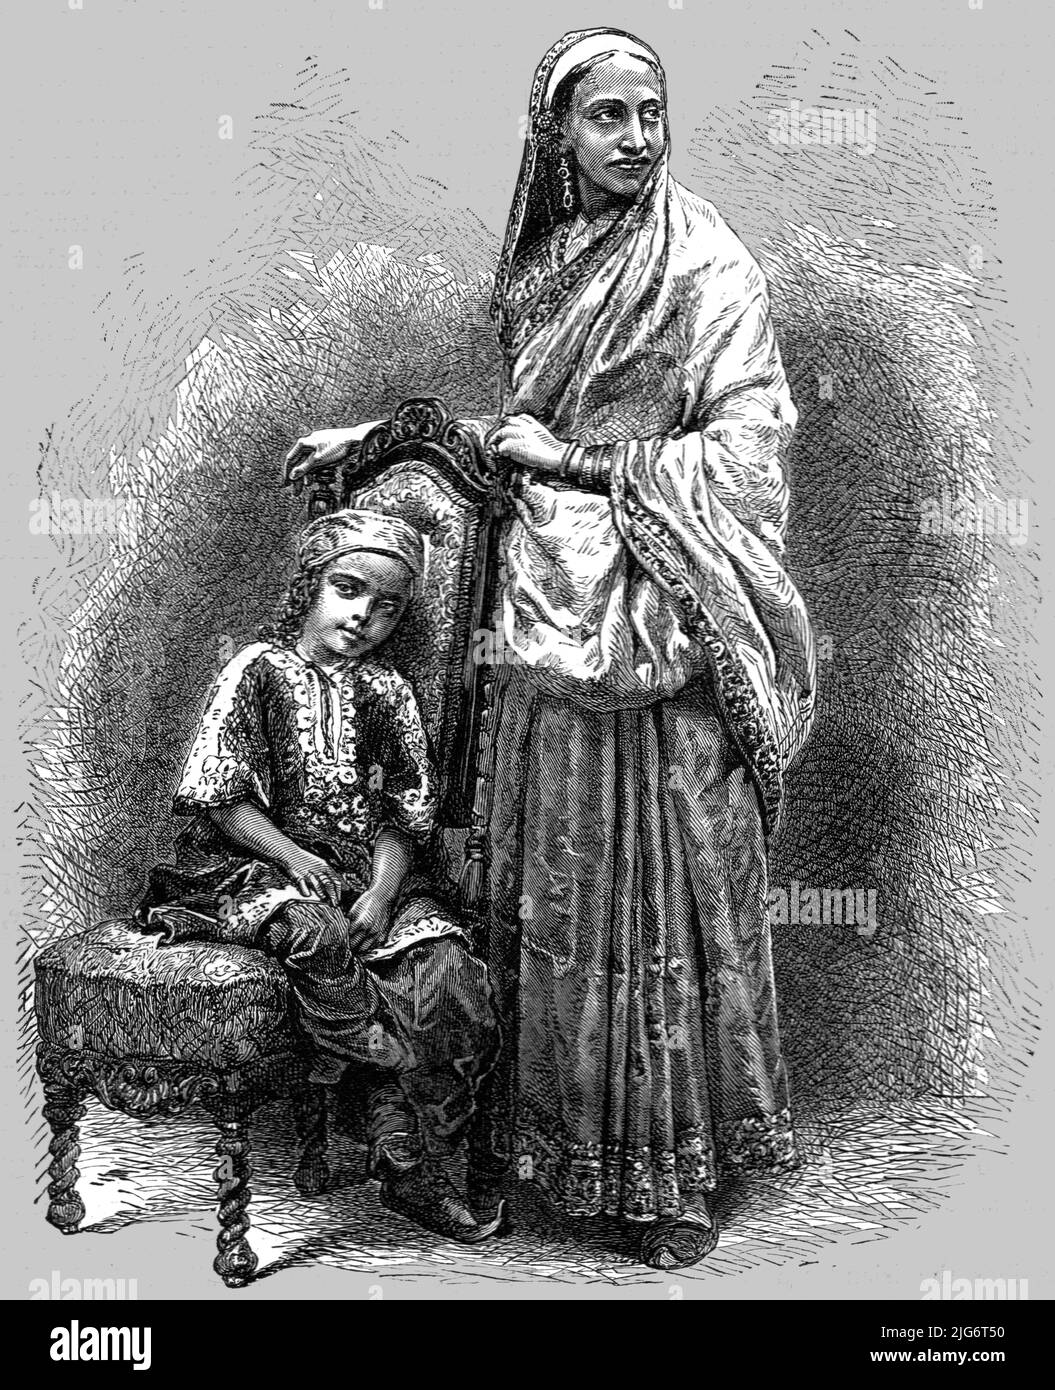 'Parsee Lady; Notes on Bombay and the Malabar Coast', 1875. [Parsi woman and child, India]. From, 'Illustrated Travels' by H.W. Bates. [Cassell, Petter, and Galpin, c1880, London] Belle Sauvage Works.London E.C. Stock Photo